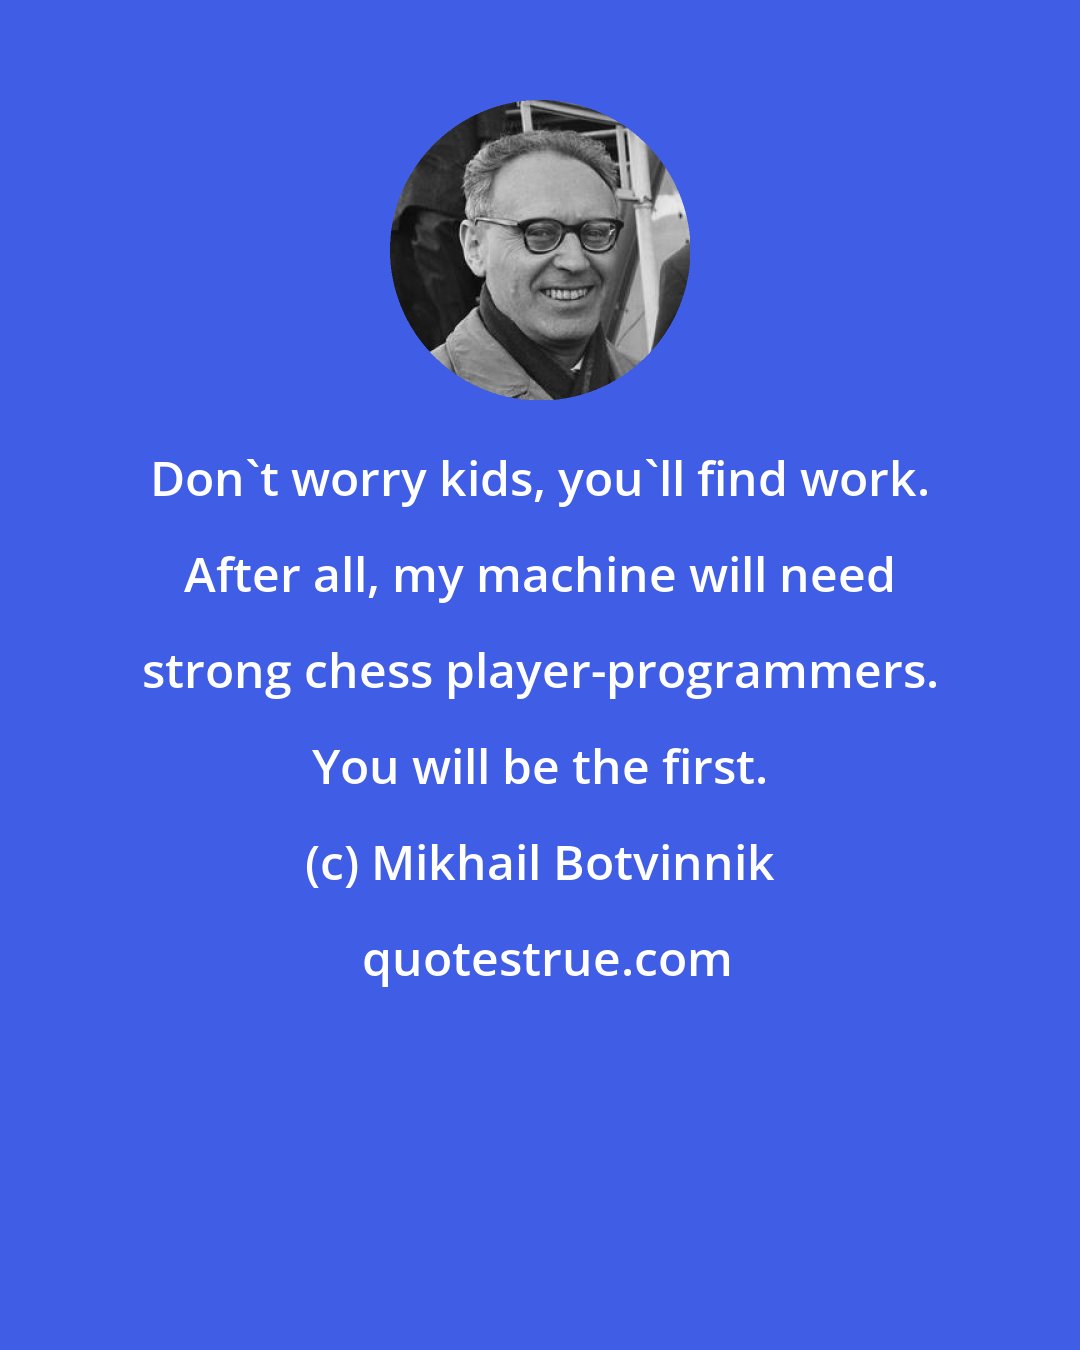 Mikhail Botvinnik: Don't worry kids, you'll find work. After all, my machine will need strong chess player-programmers. You will be the first.